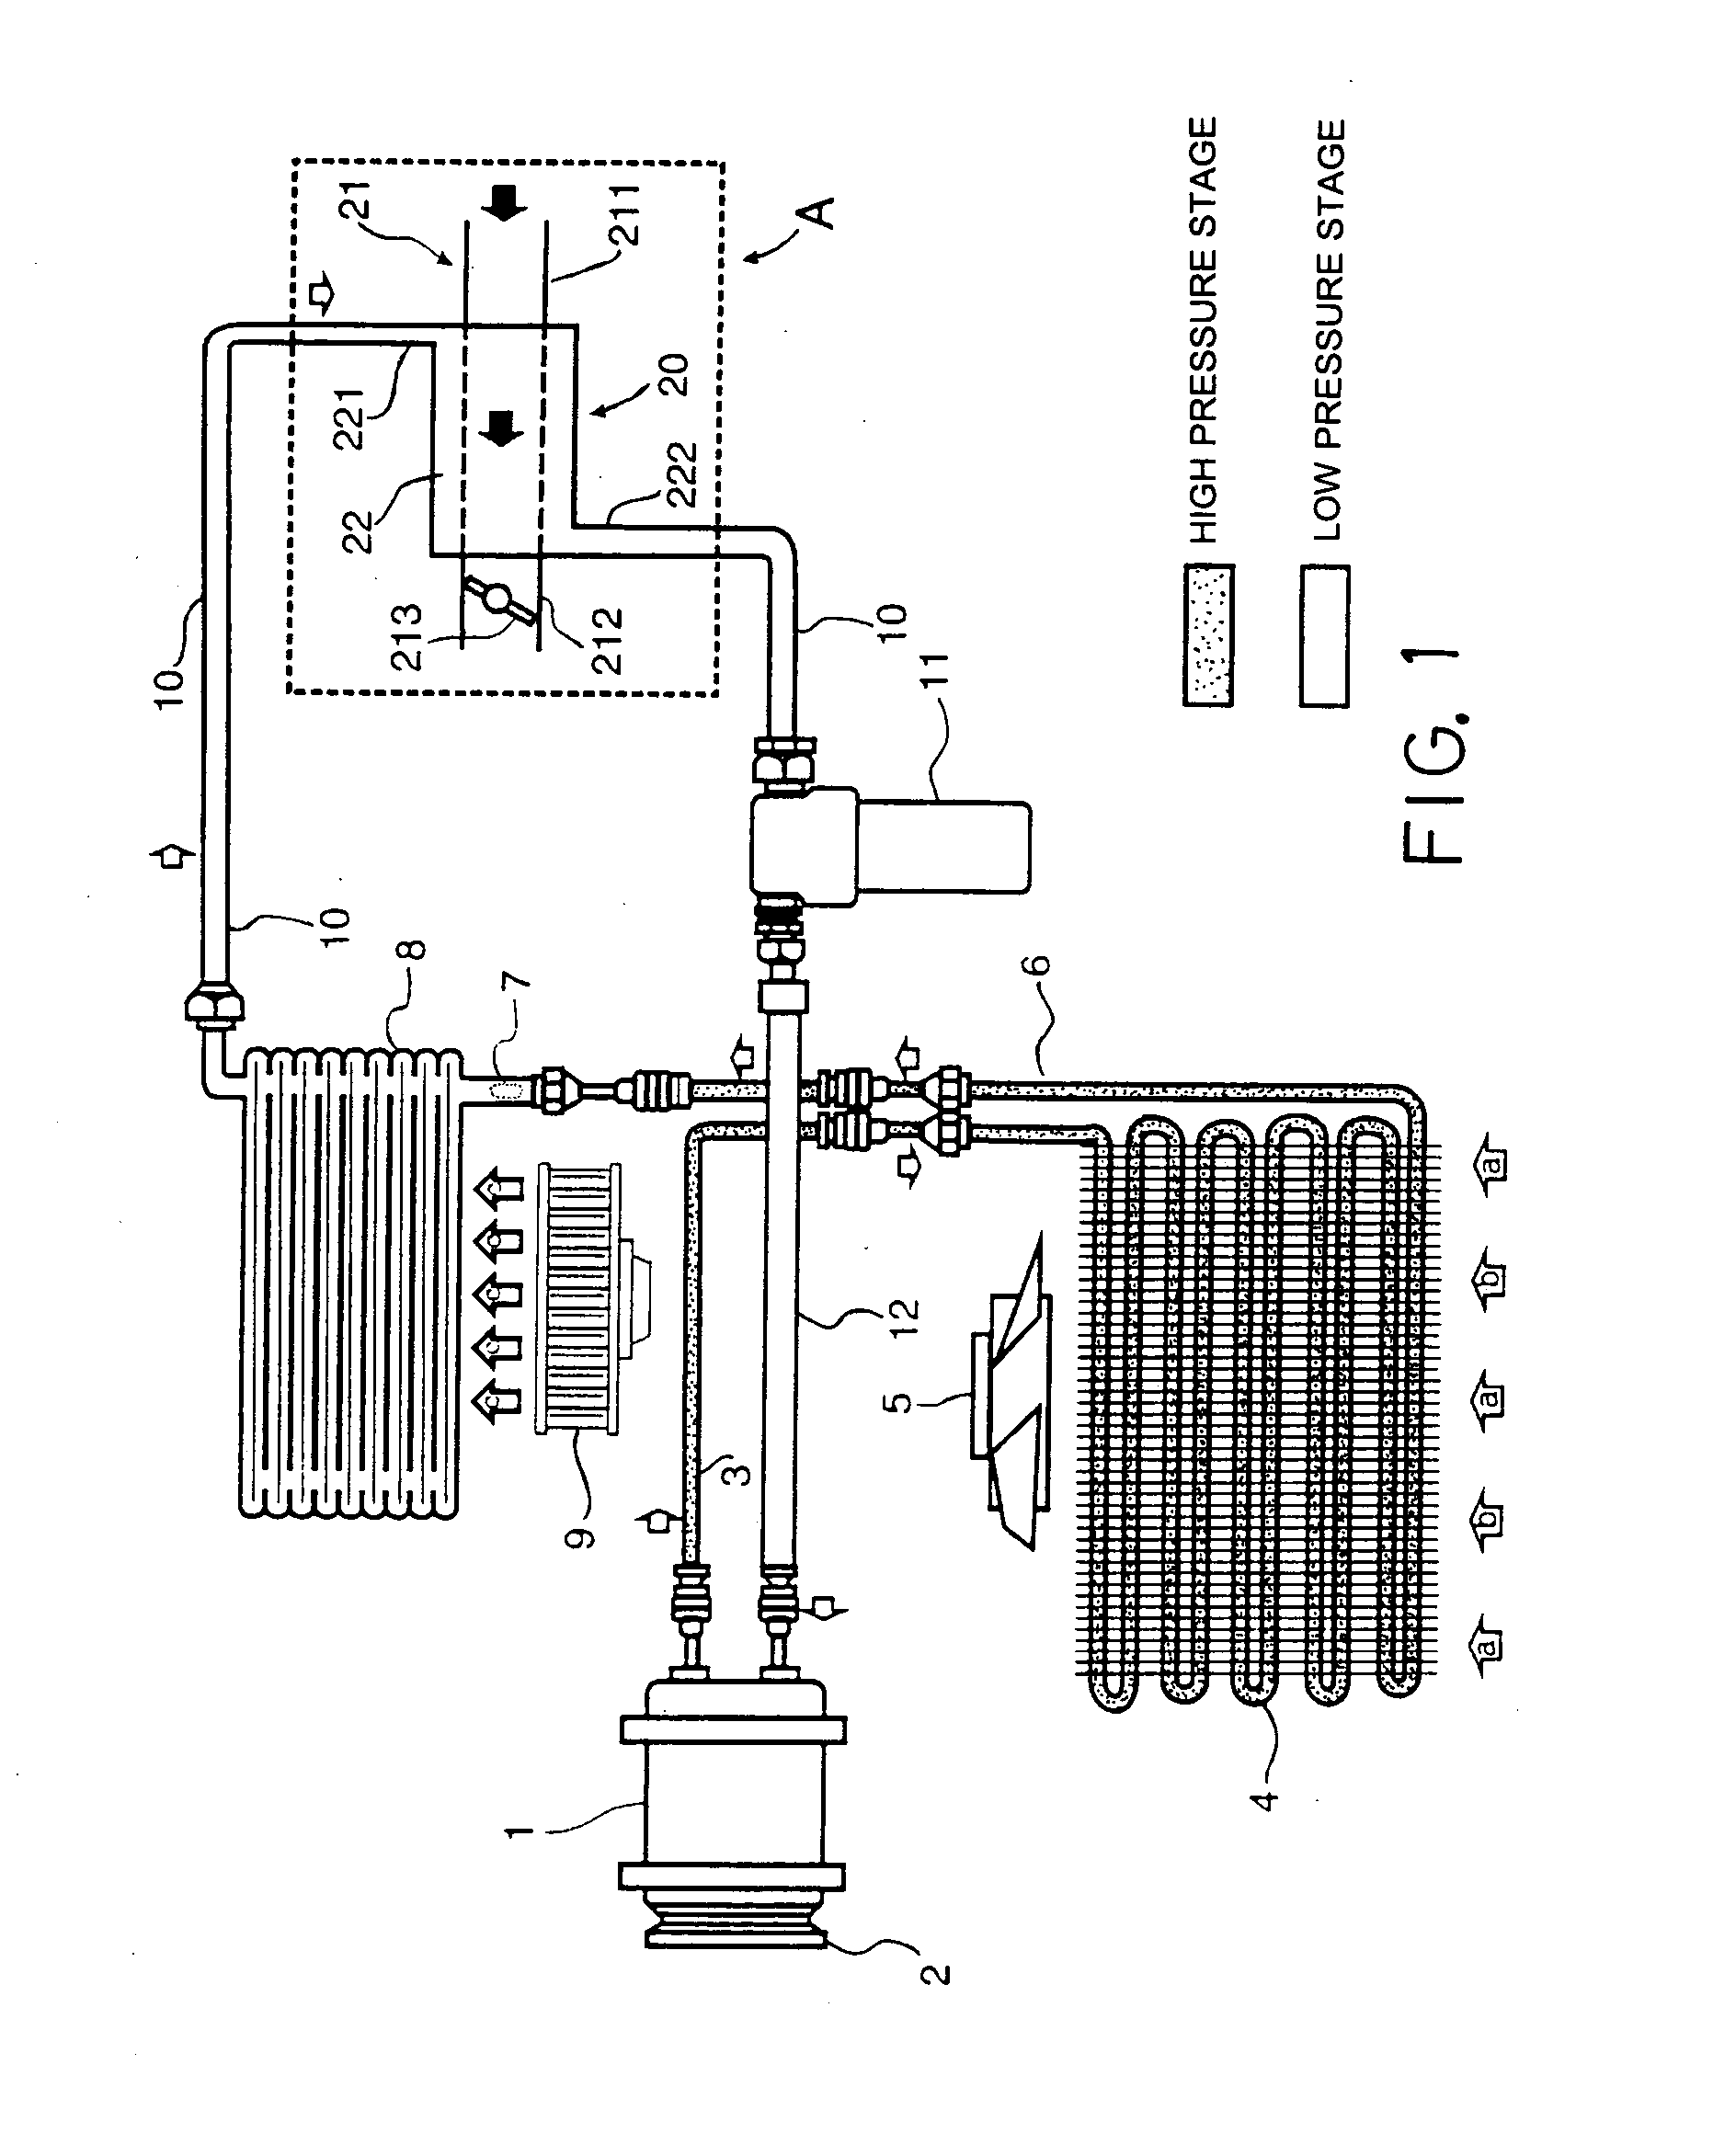 Cooling system with refrigerant for air conditioning and lowering temperature of engine